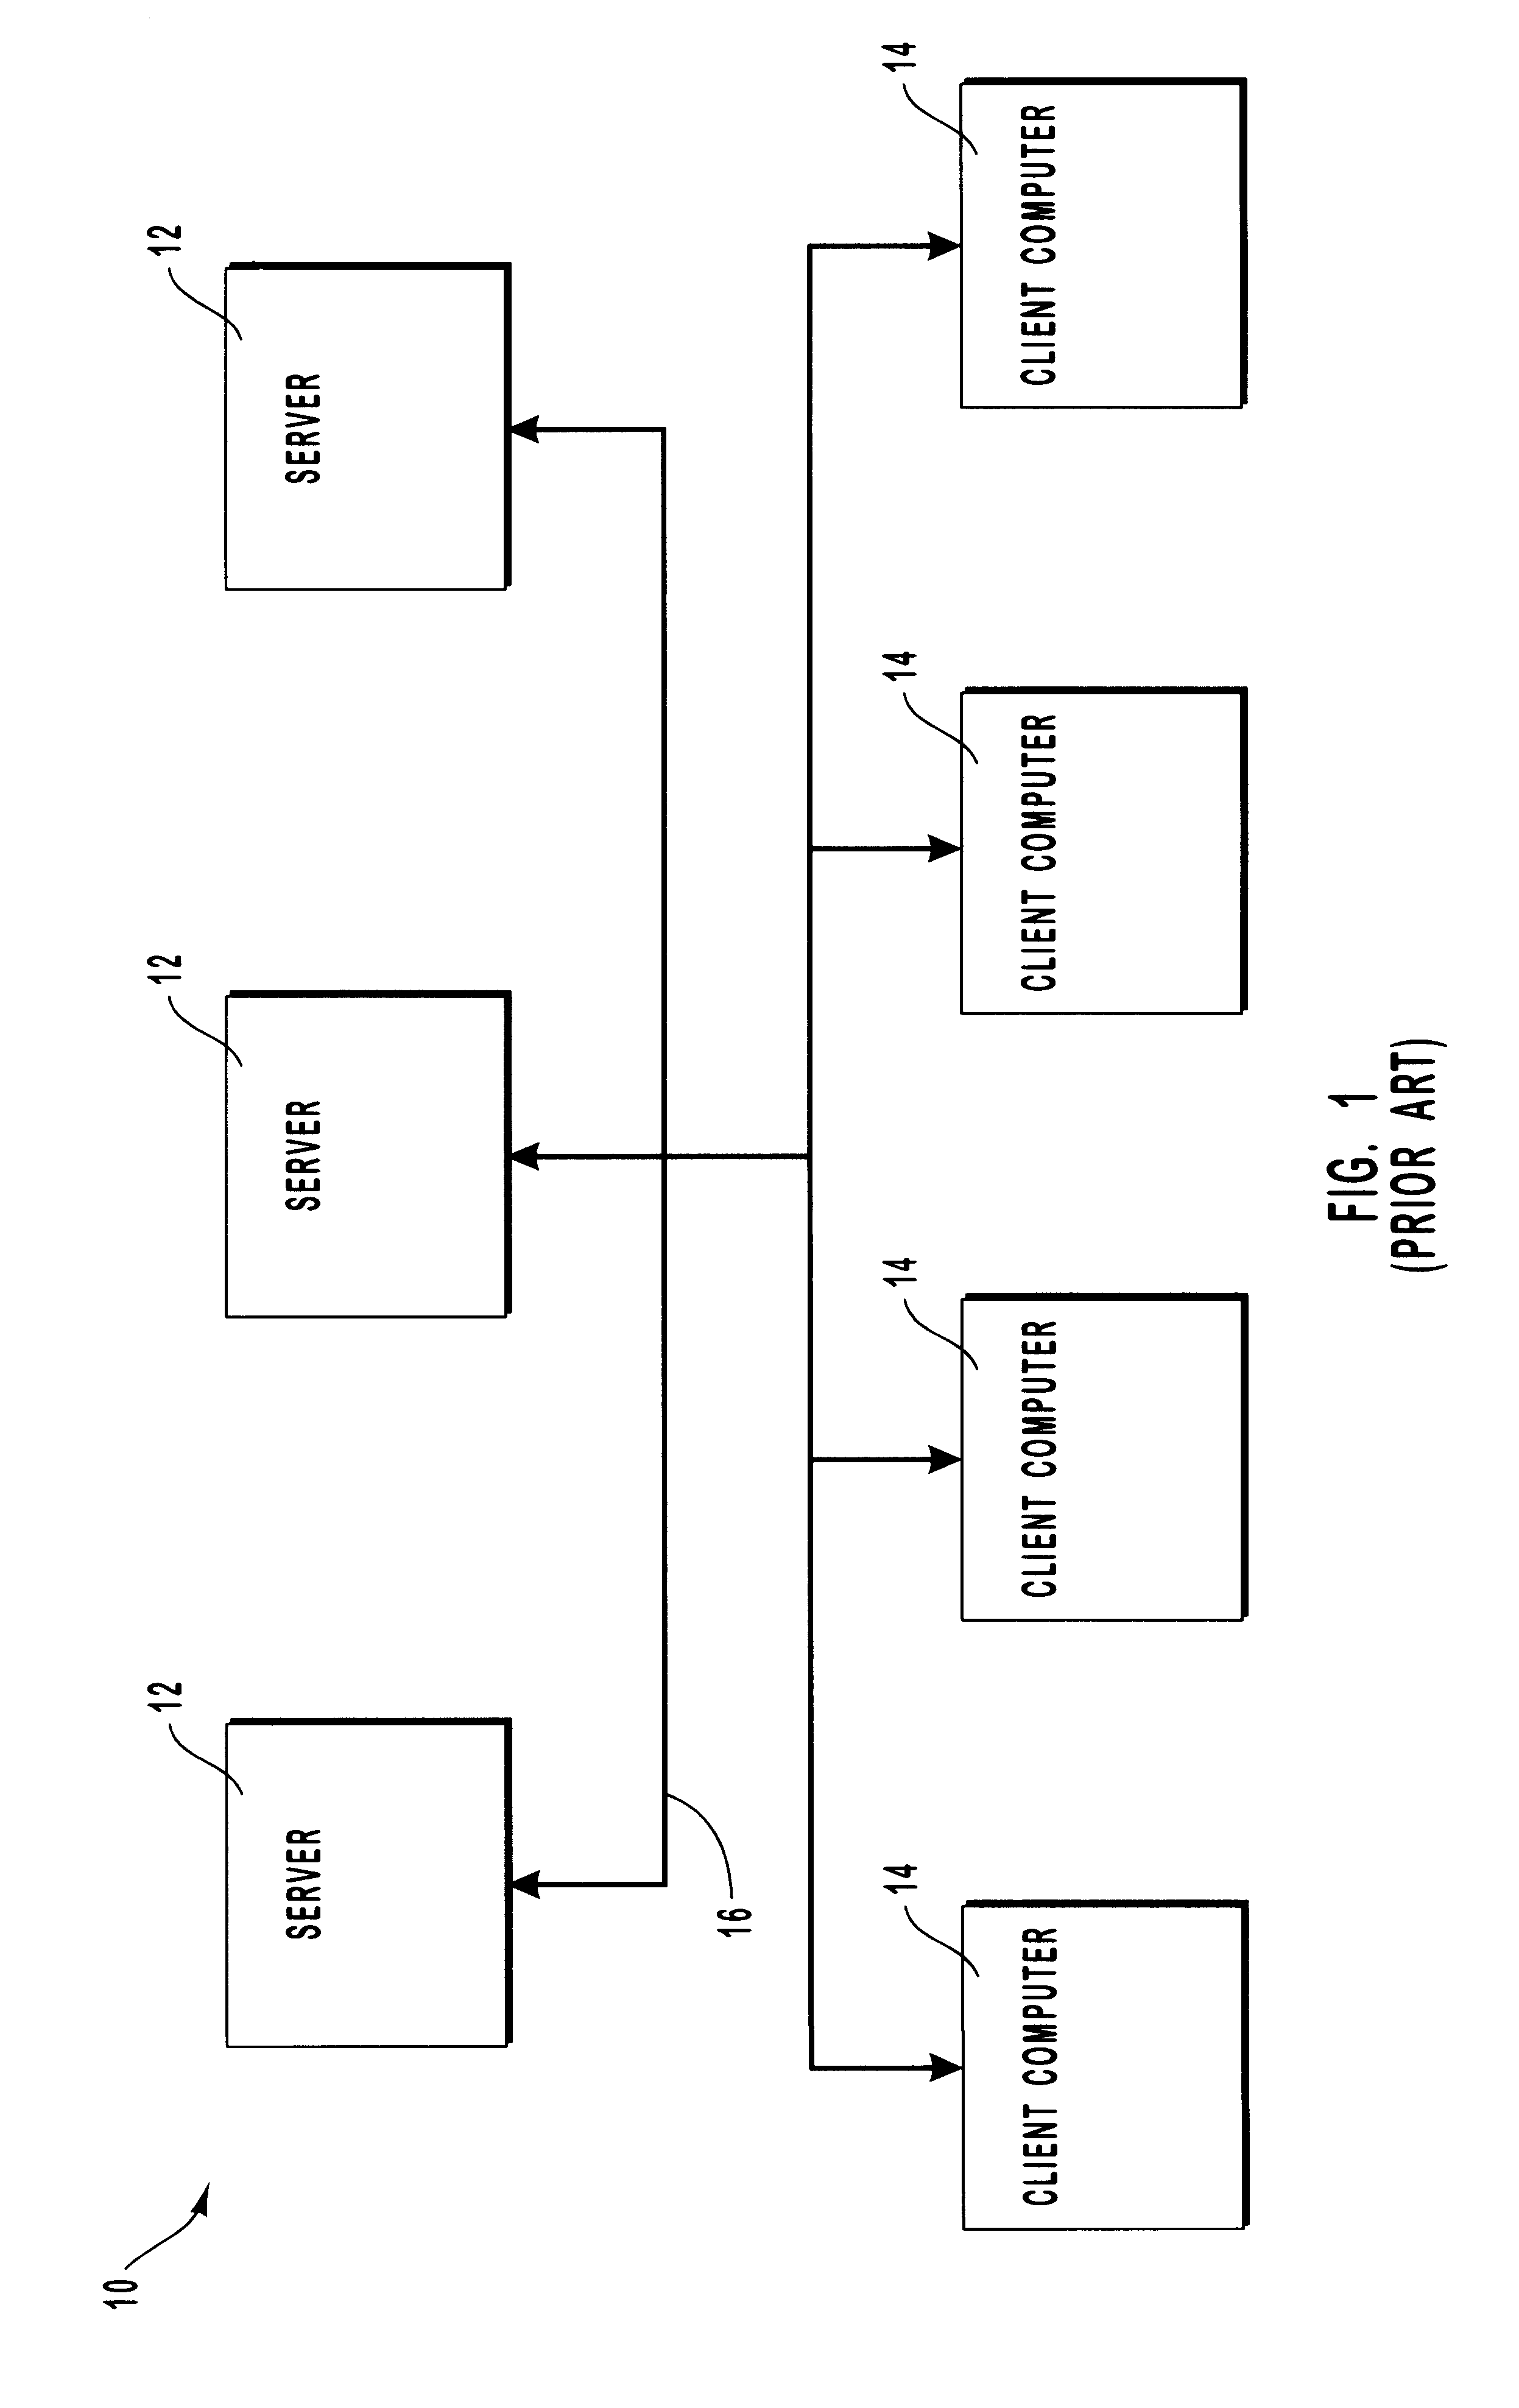 Correcting for changed client machine hardware when using a server-based operating system